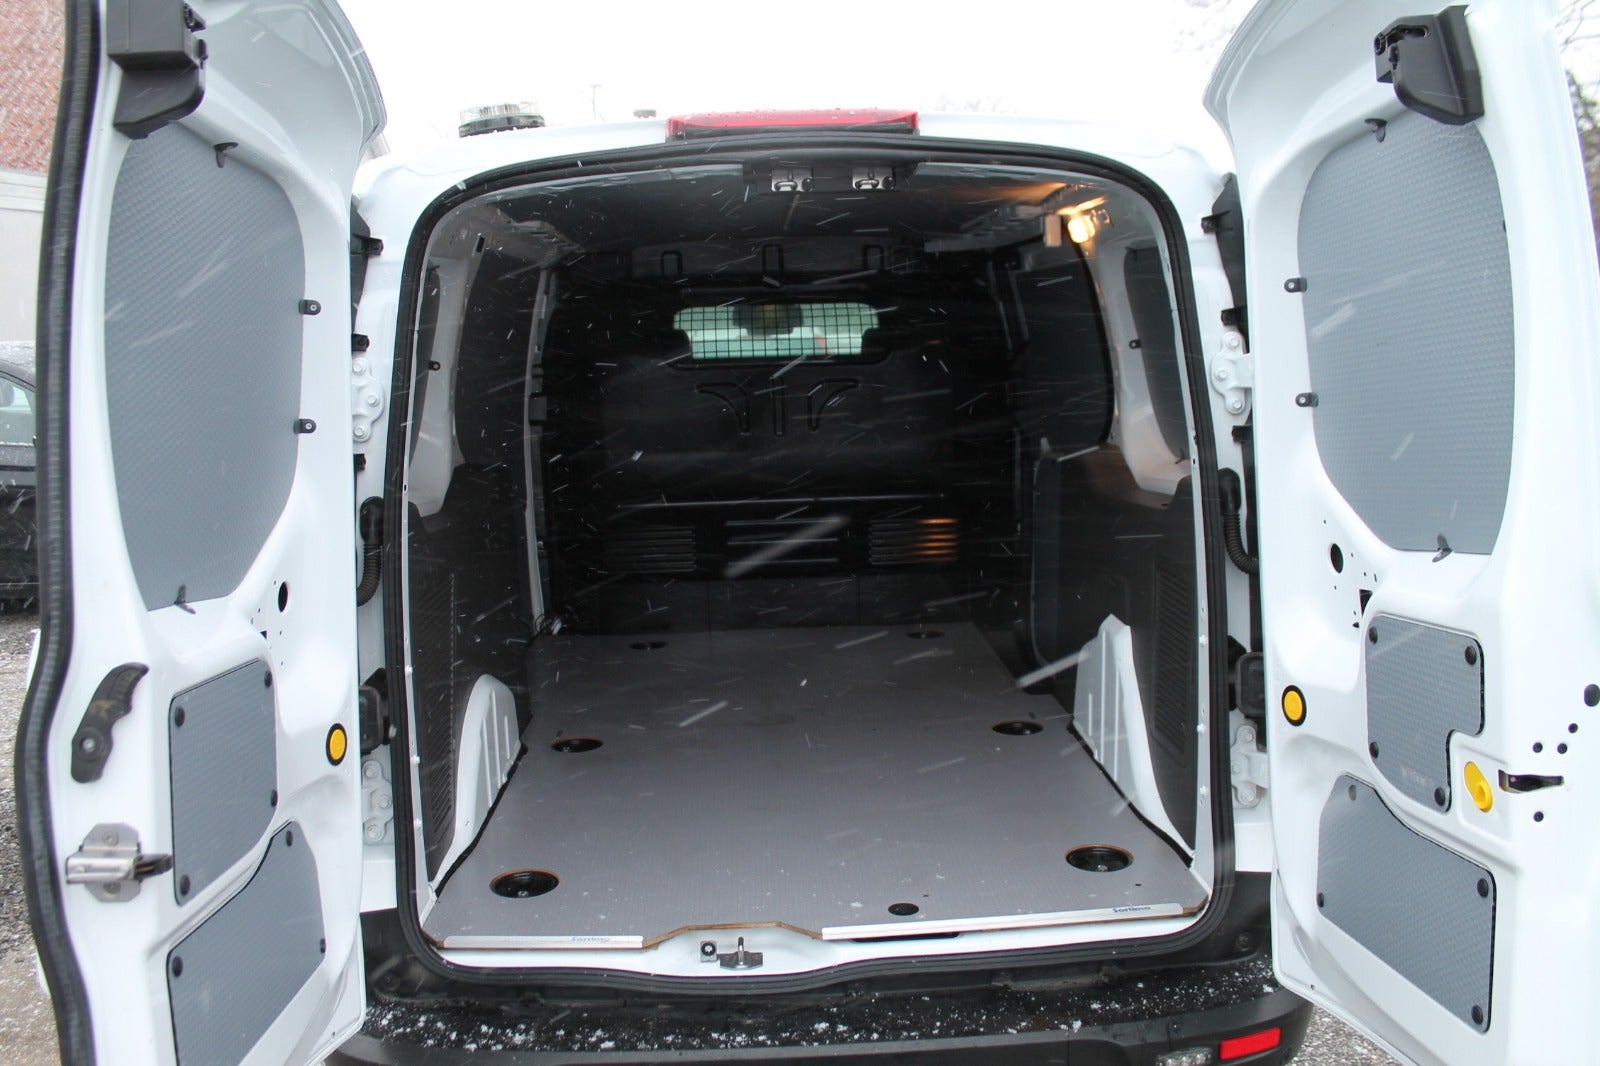 Ford Transit Connect 1,5 TDCi 100 Trend lang d Diesel